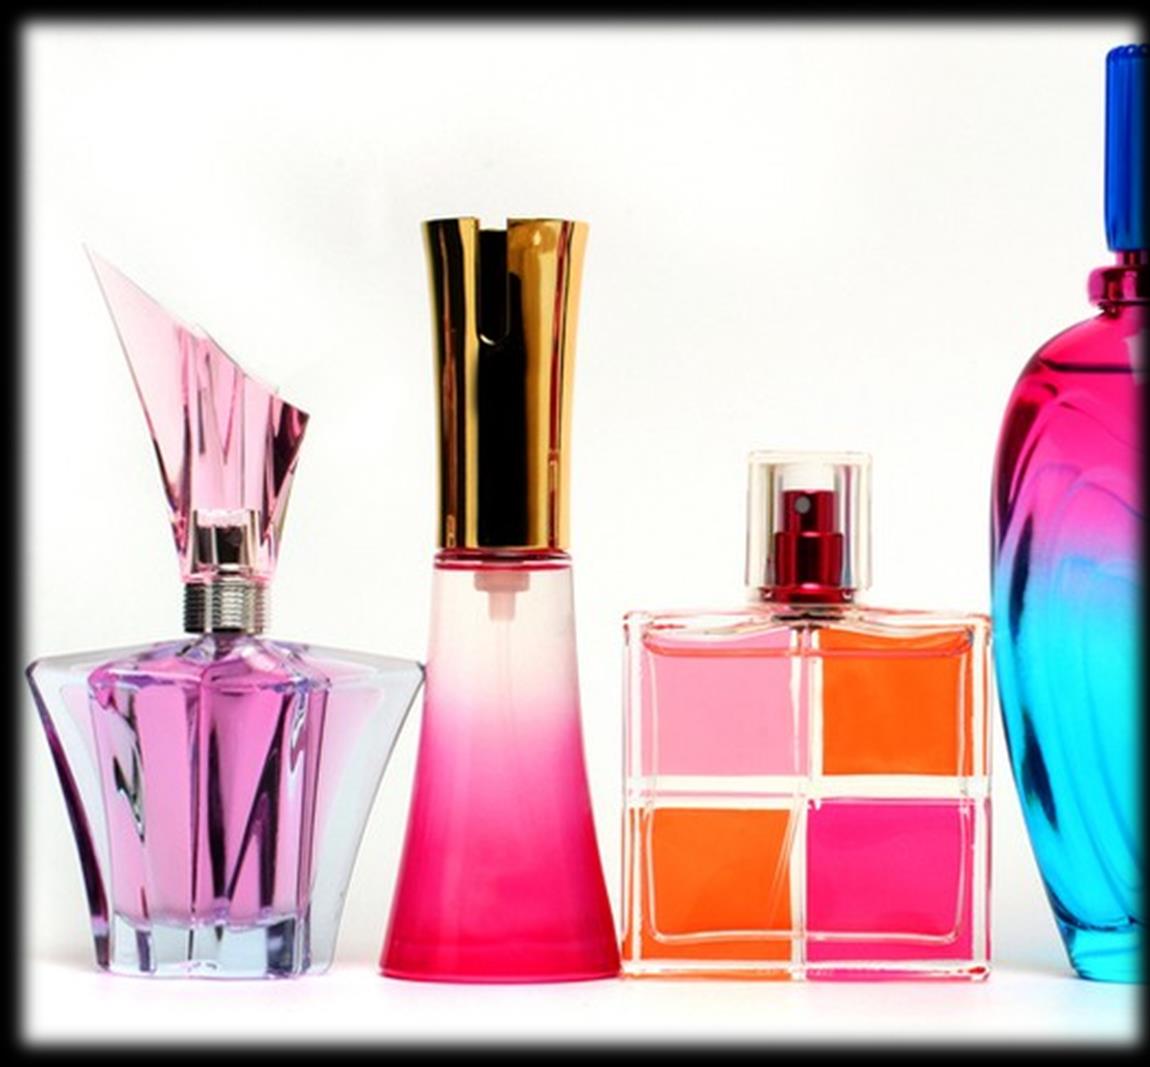 FRAGRANCES Found in soaps, cleaners, perfumes, lotions, shampoos May include phthalates, neurotoxins, and synthetic musks One of